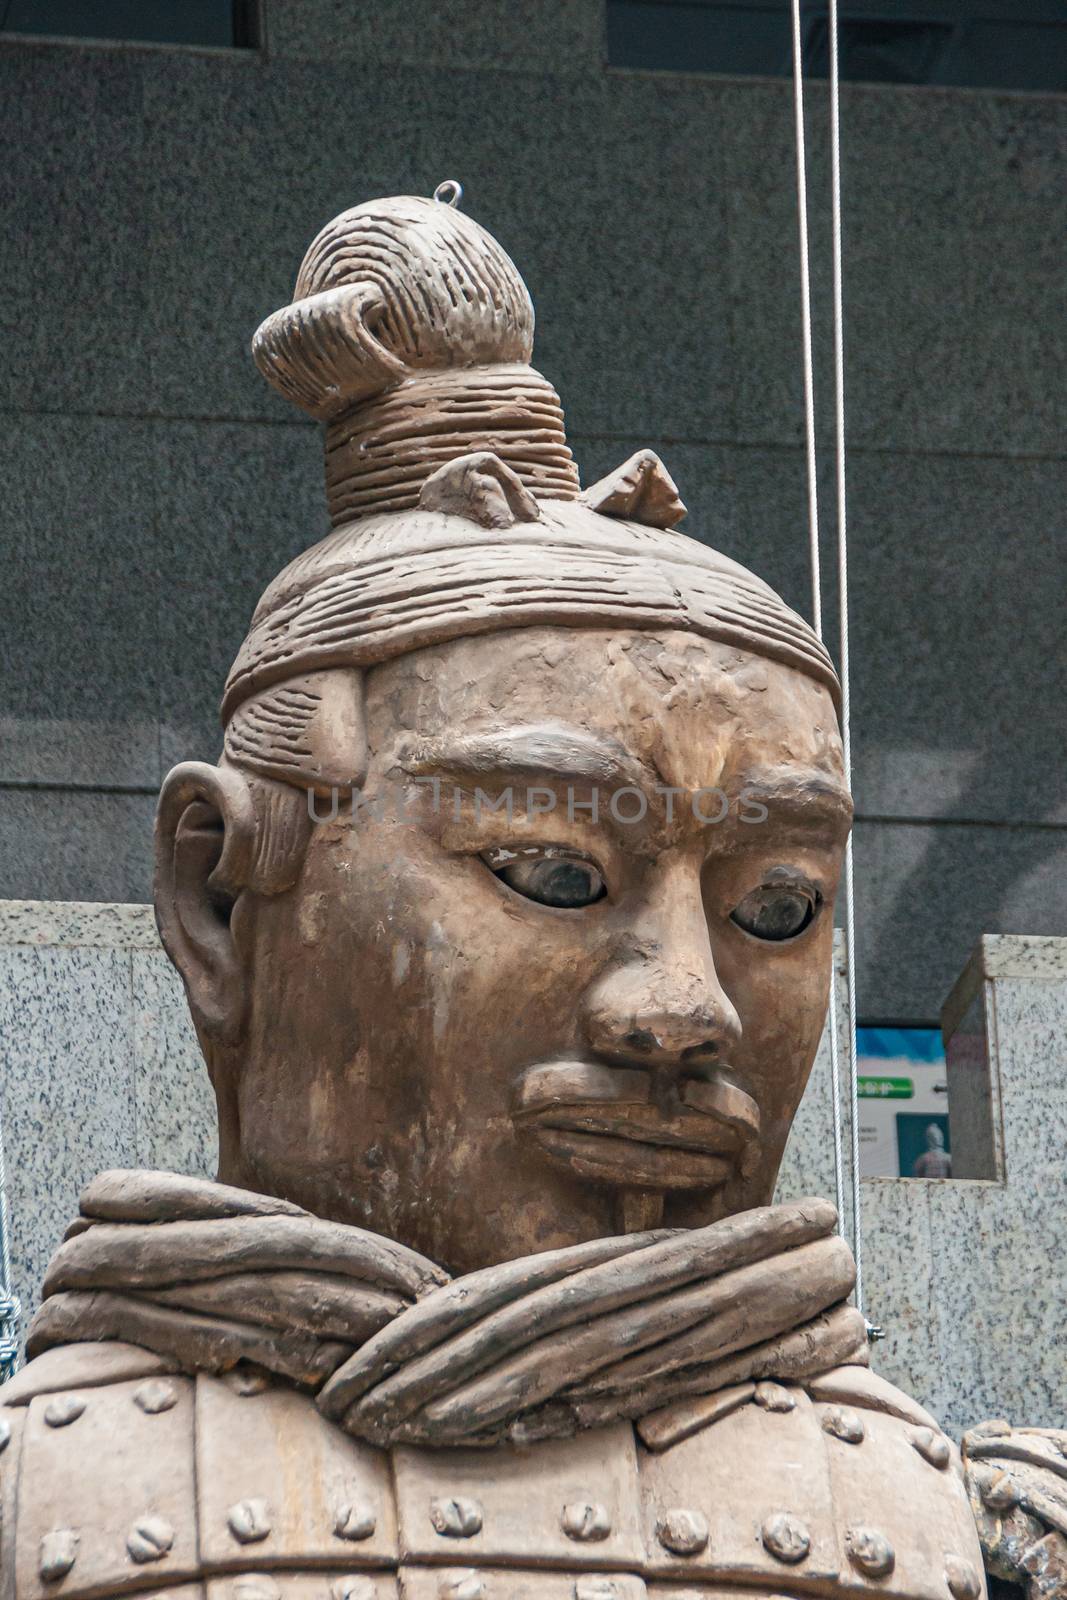 Face of Giant Officer sculpture at Terracotta Army museum, Xian, by Claudine